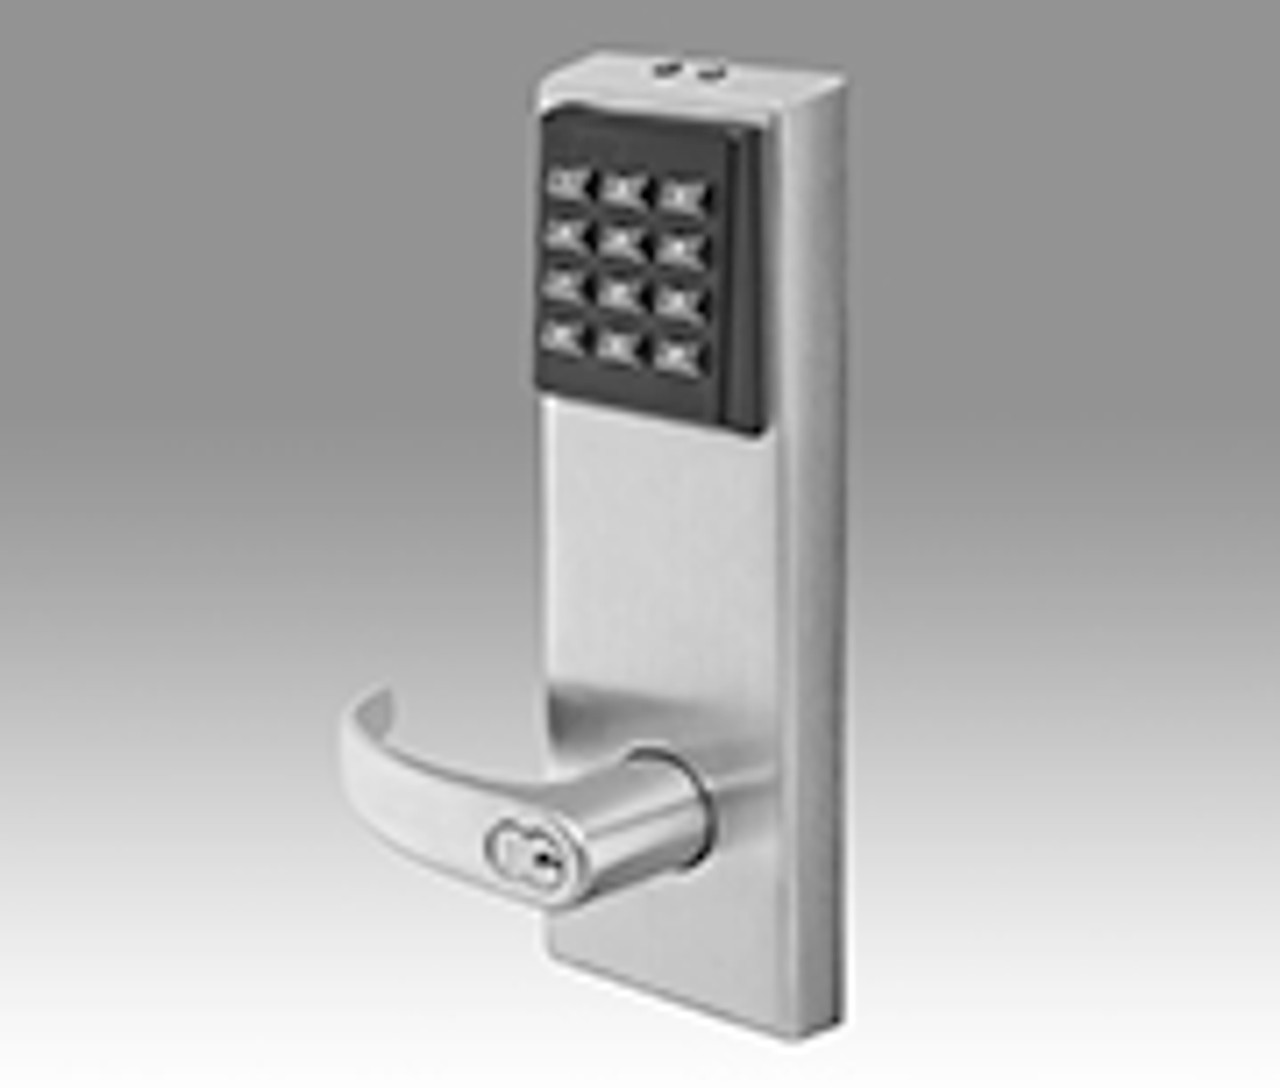 Commercial Keypad Locks and Access Control